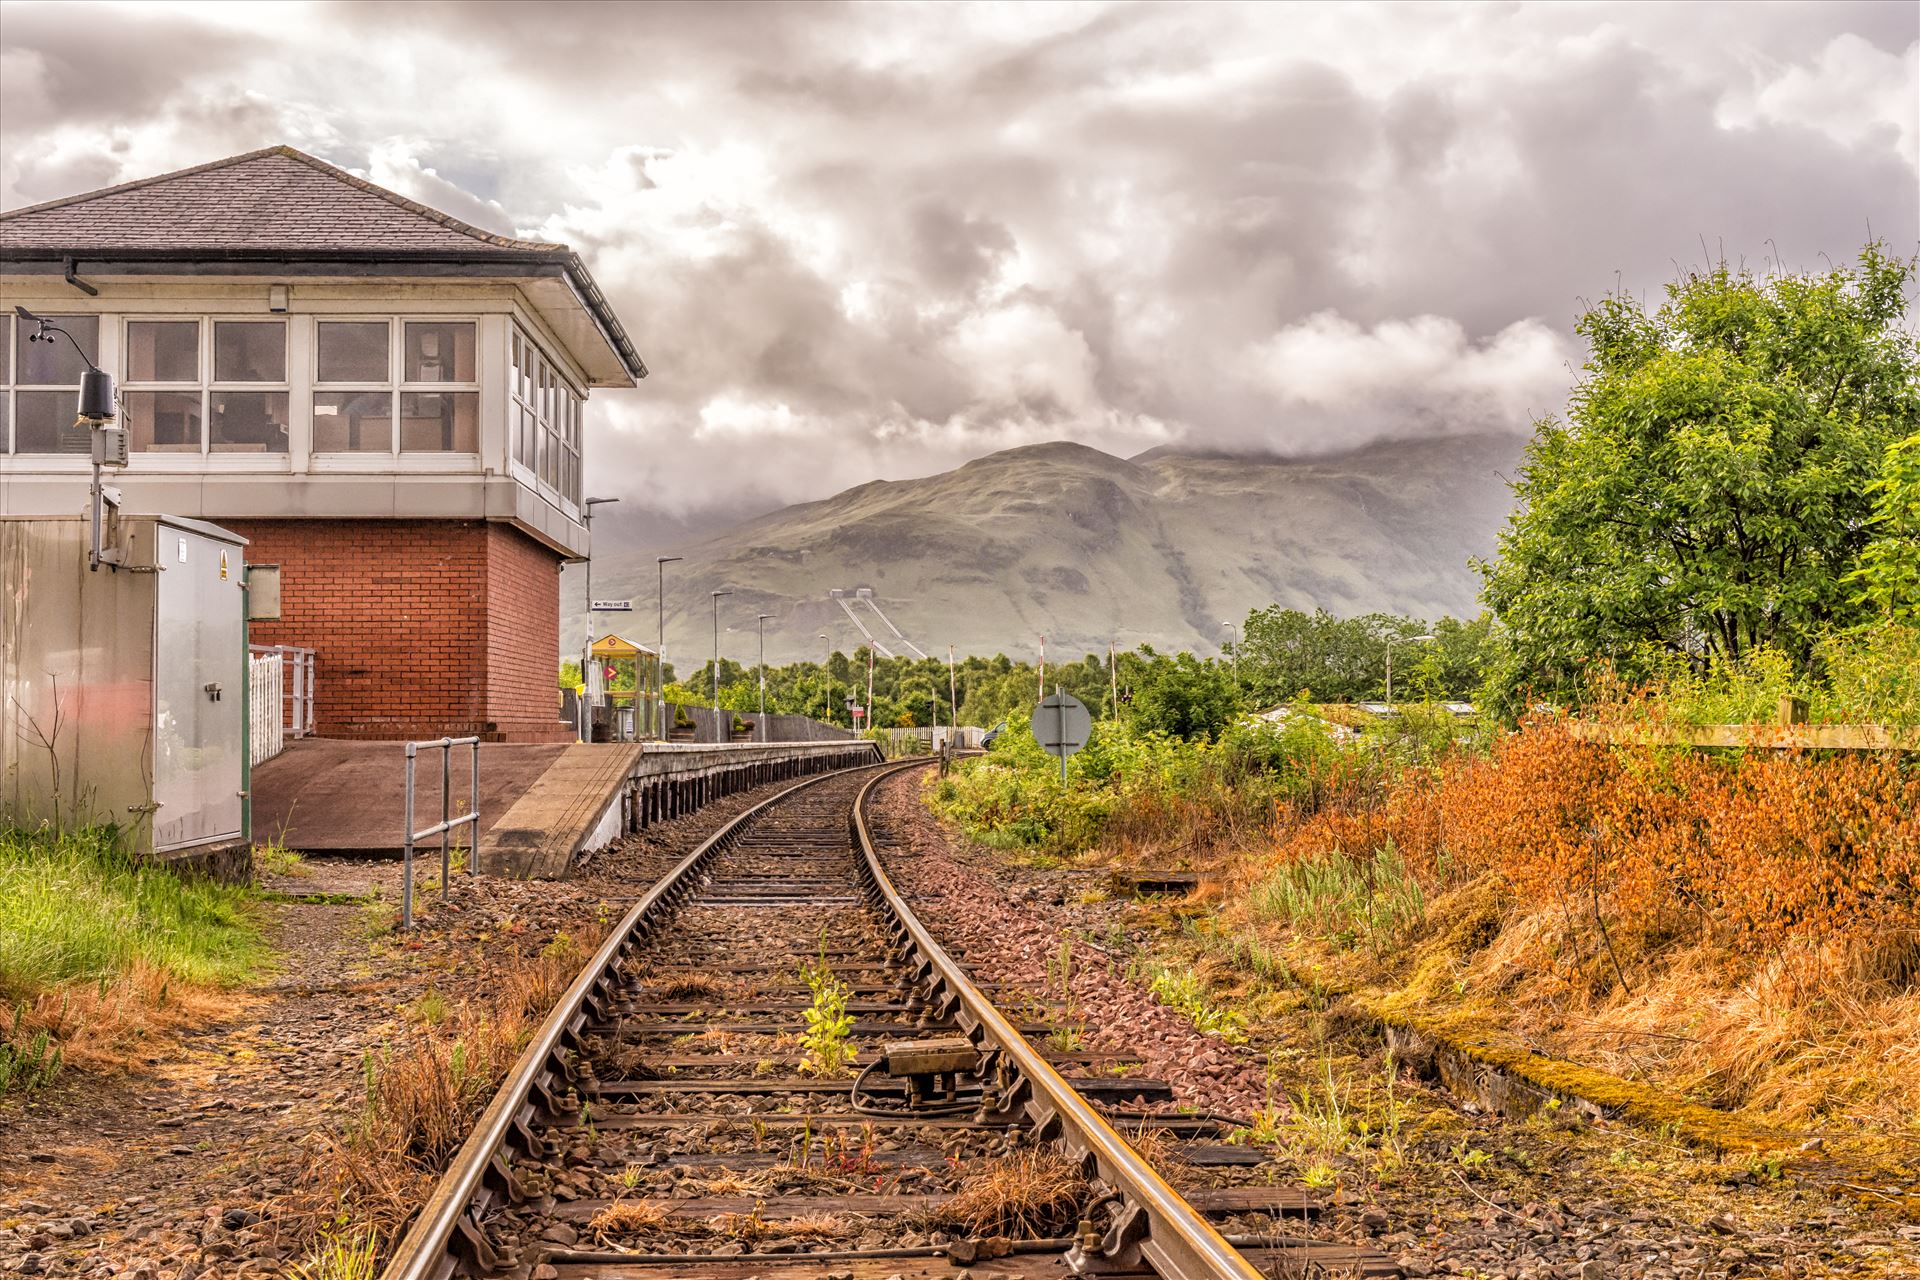 Down the lines - This was taken at Banavie, which is on the Fort William-Malaig line. This line was made famous in one of the Harry Potter films. by philreay